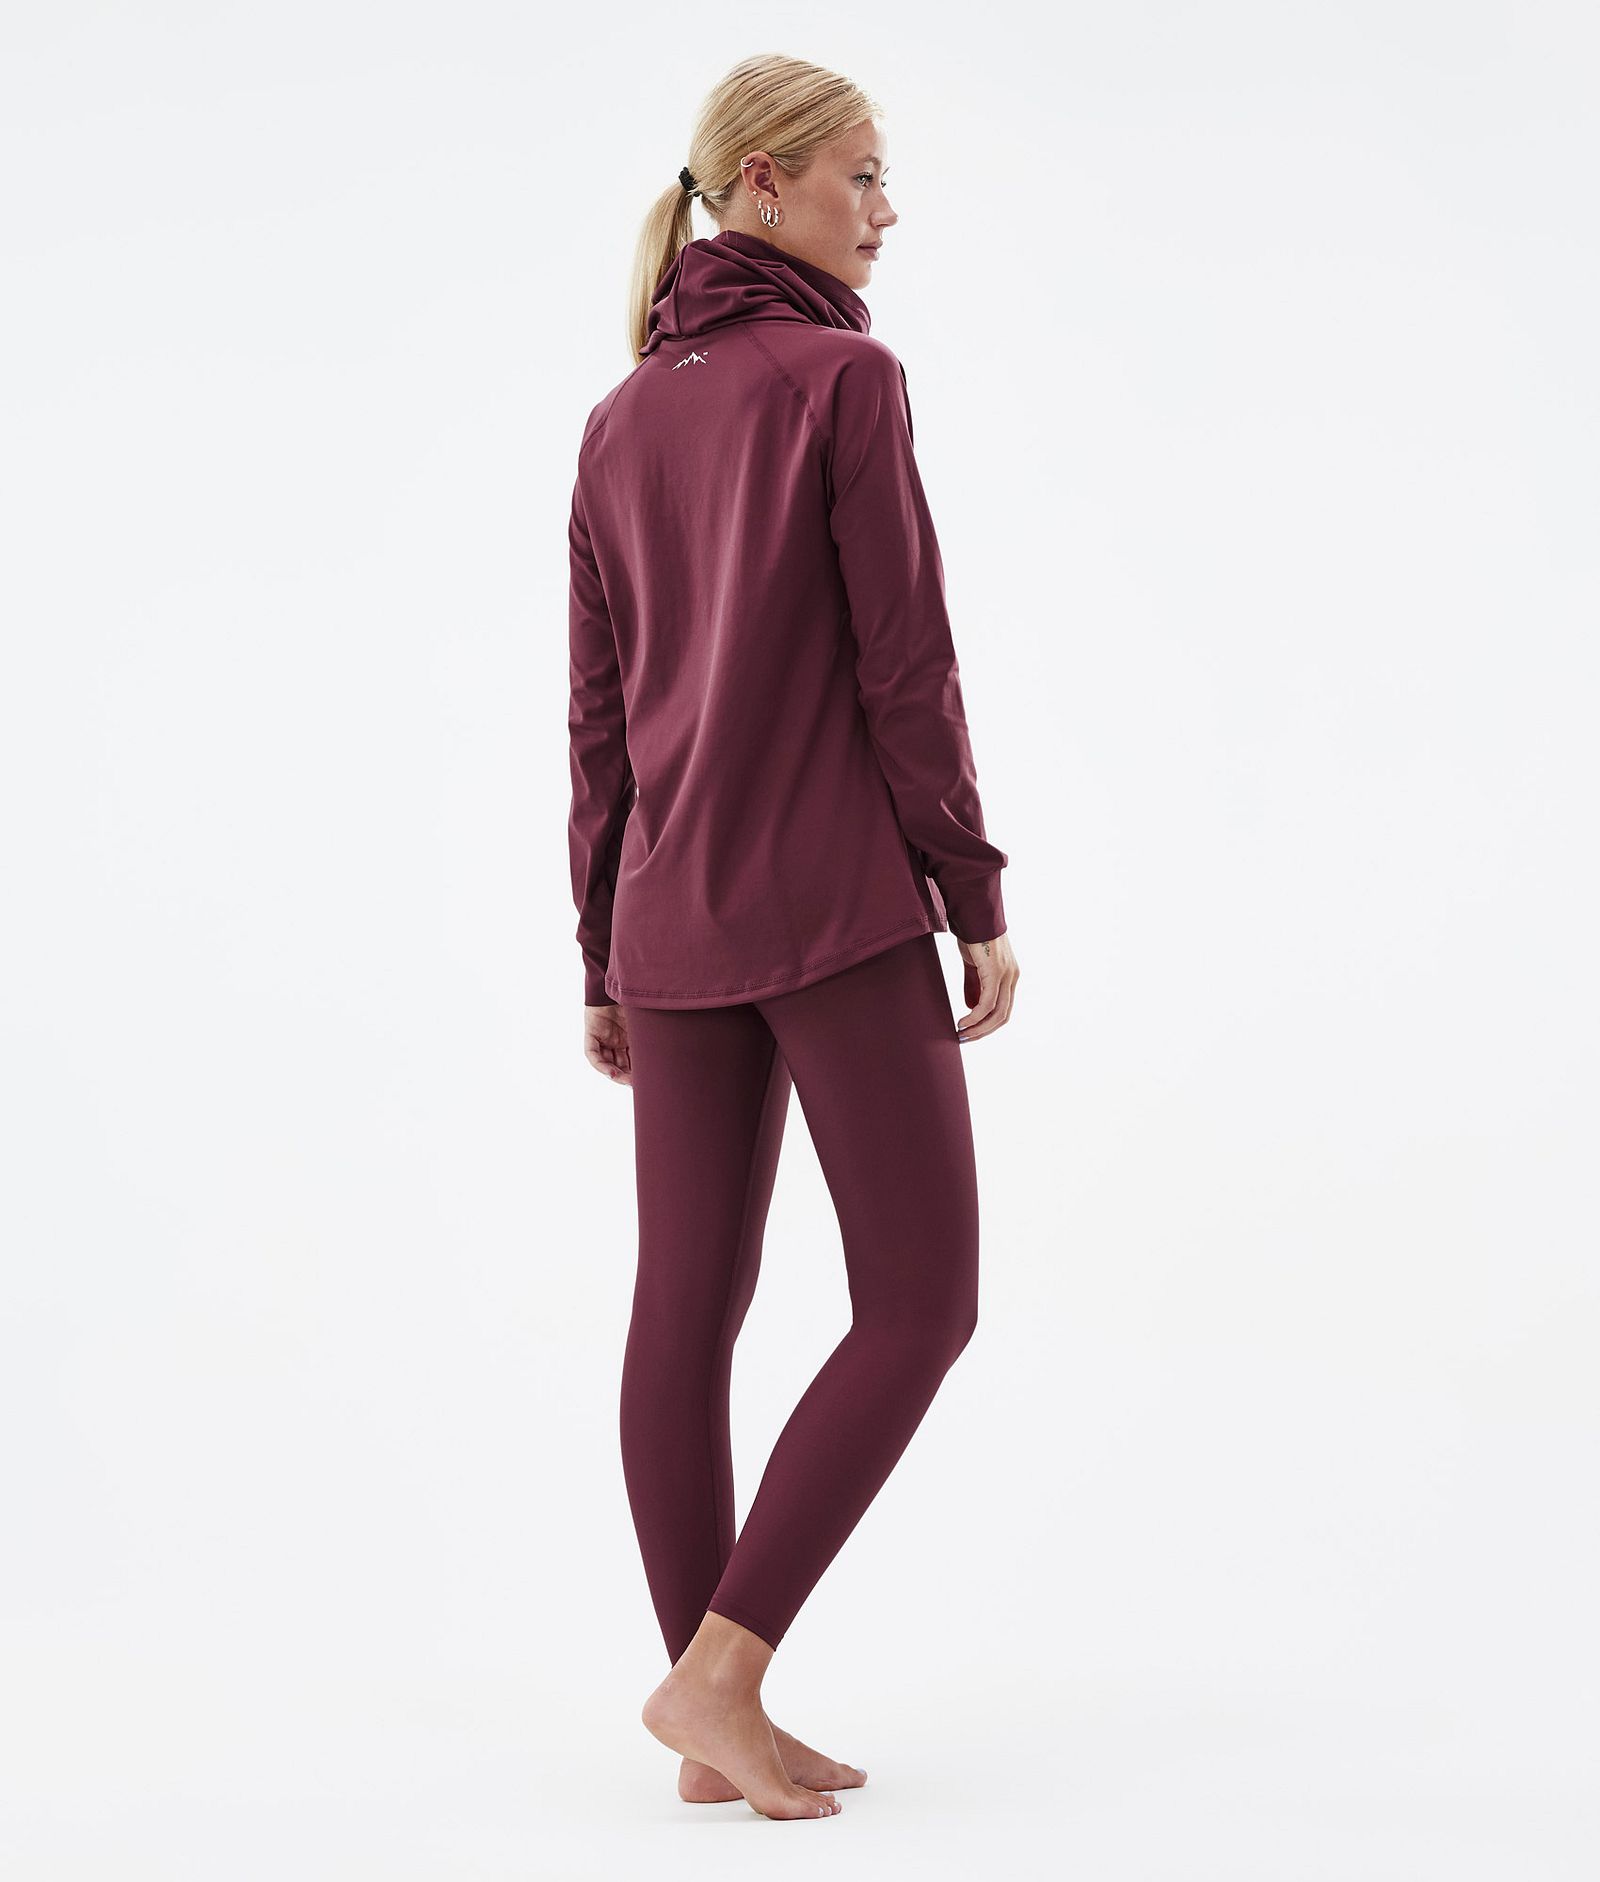 Snuggle W 2022 Tee-shirt thermique Femme 2X-Up Burgundy